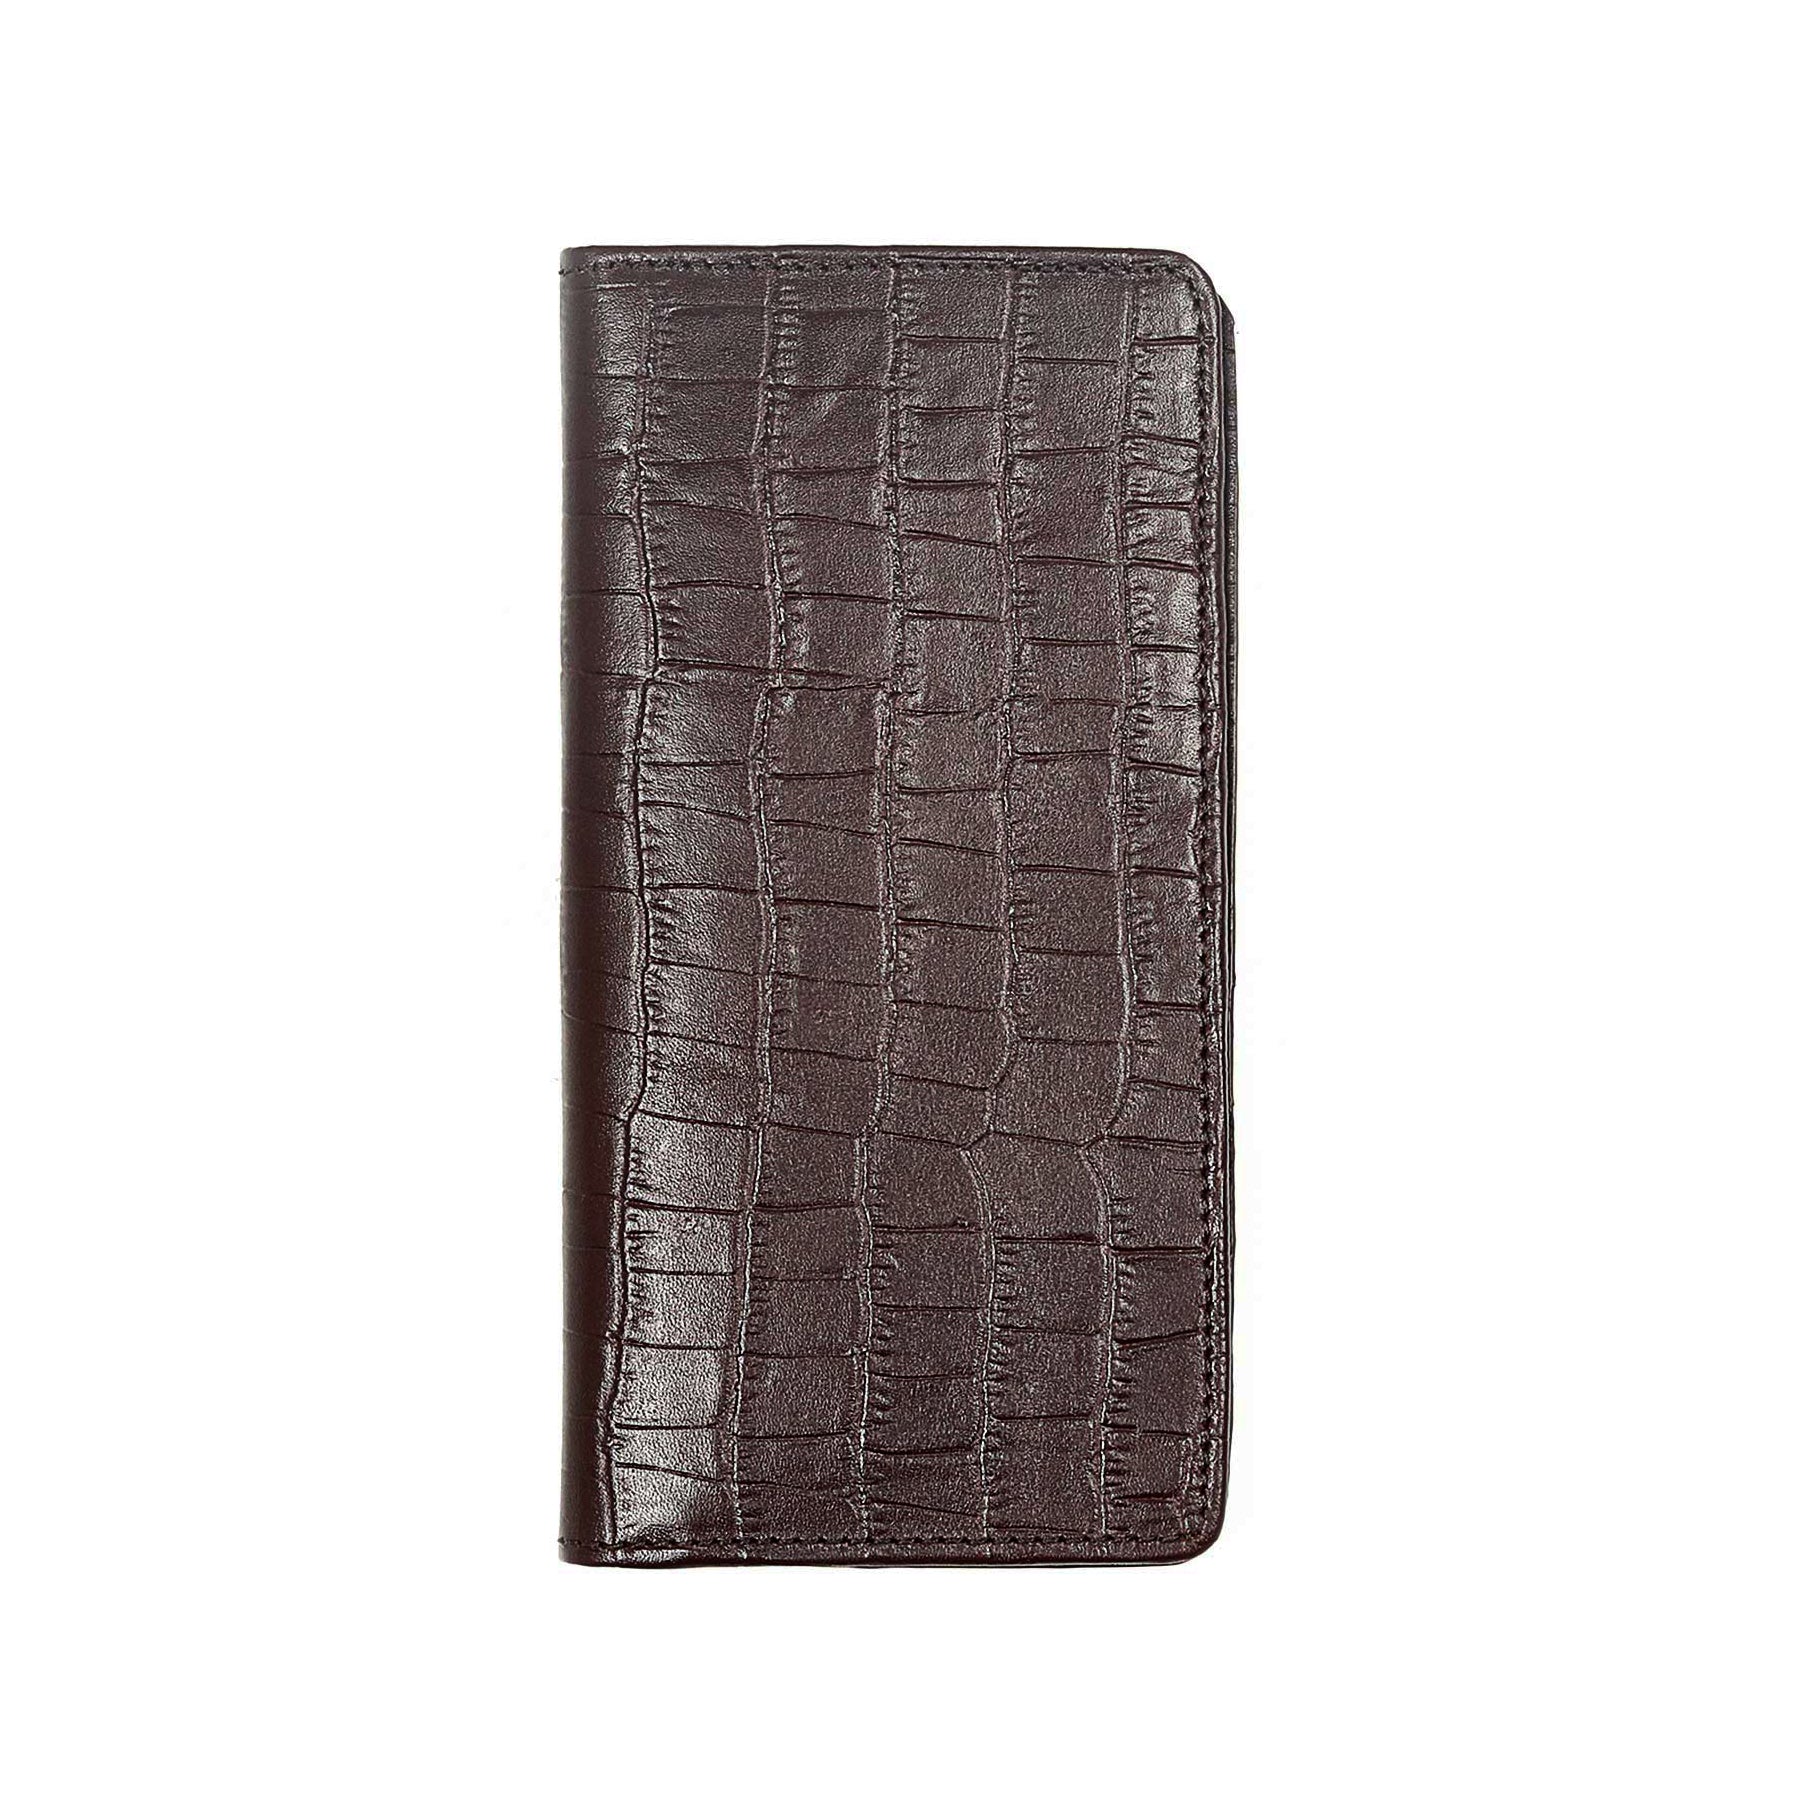 Zays Premium Leather Multifunctional Long Mobile Wallet for Men - Dark Chocolate (ZAYSWL30)